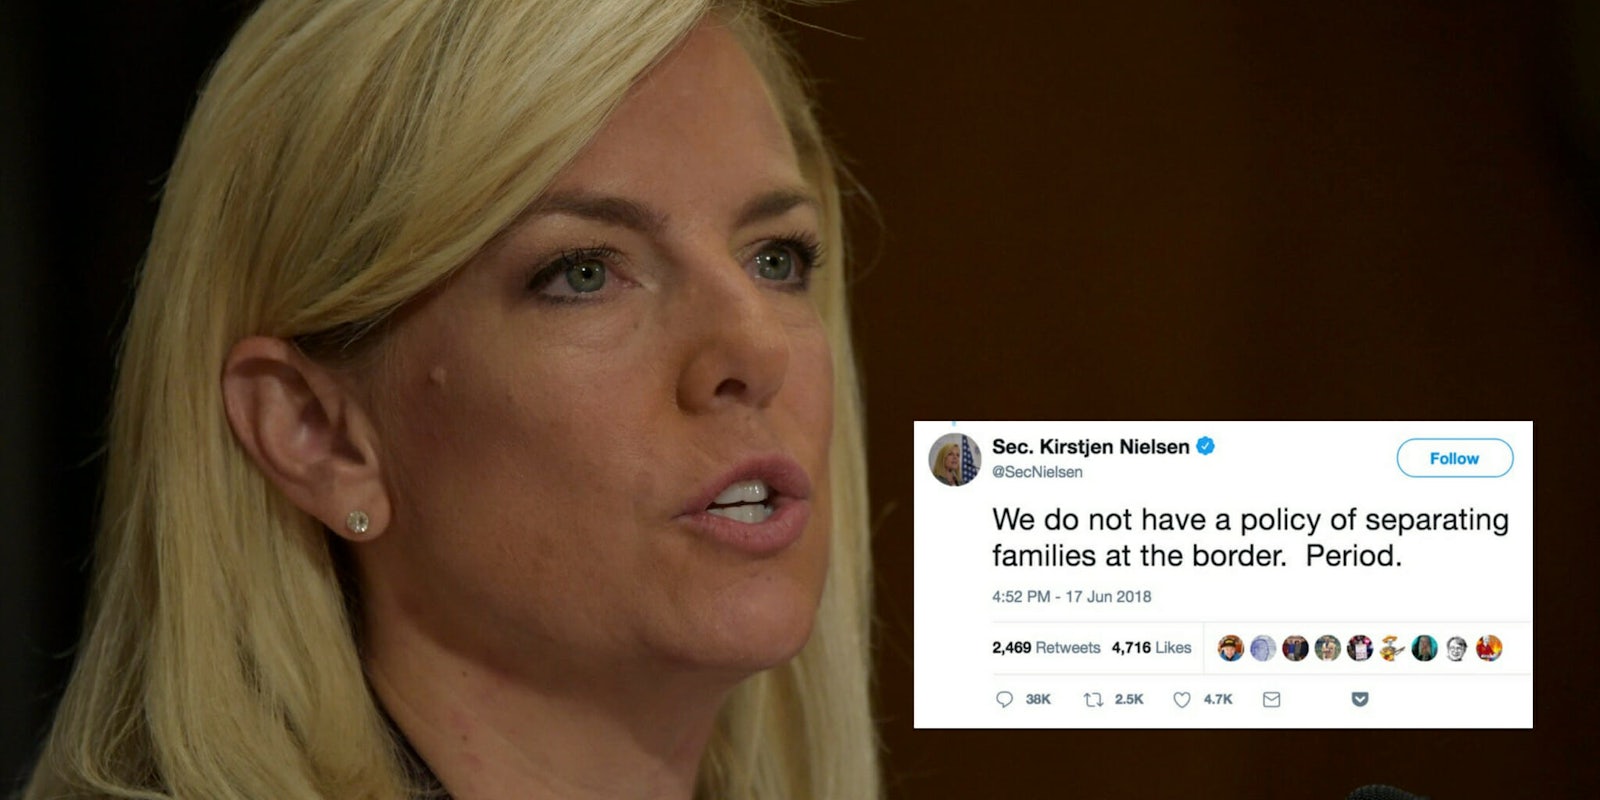 Homeland Security Secretary Kirstjen Nielsen falsely tweets that the department does not have a policy of separating families at the border.